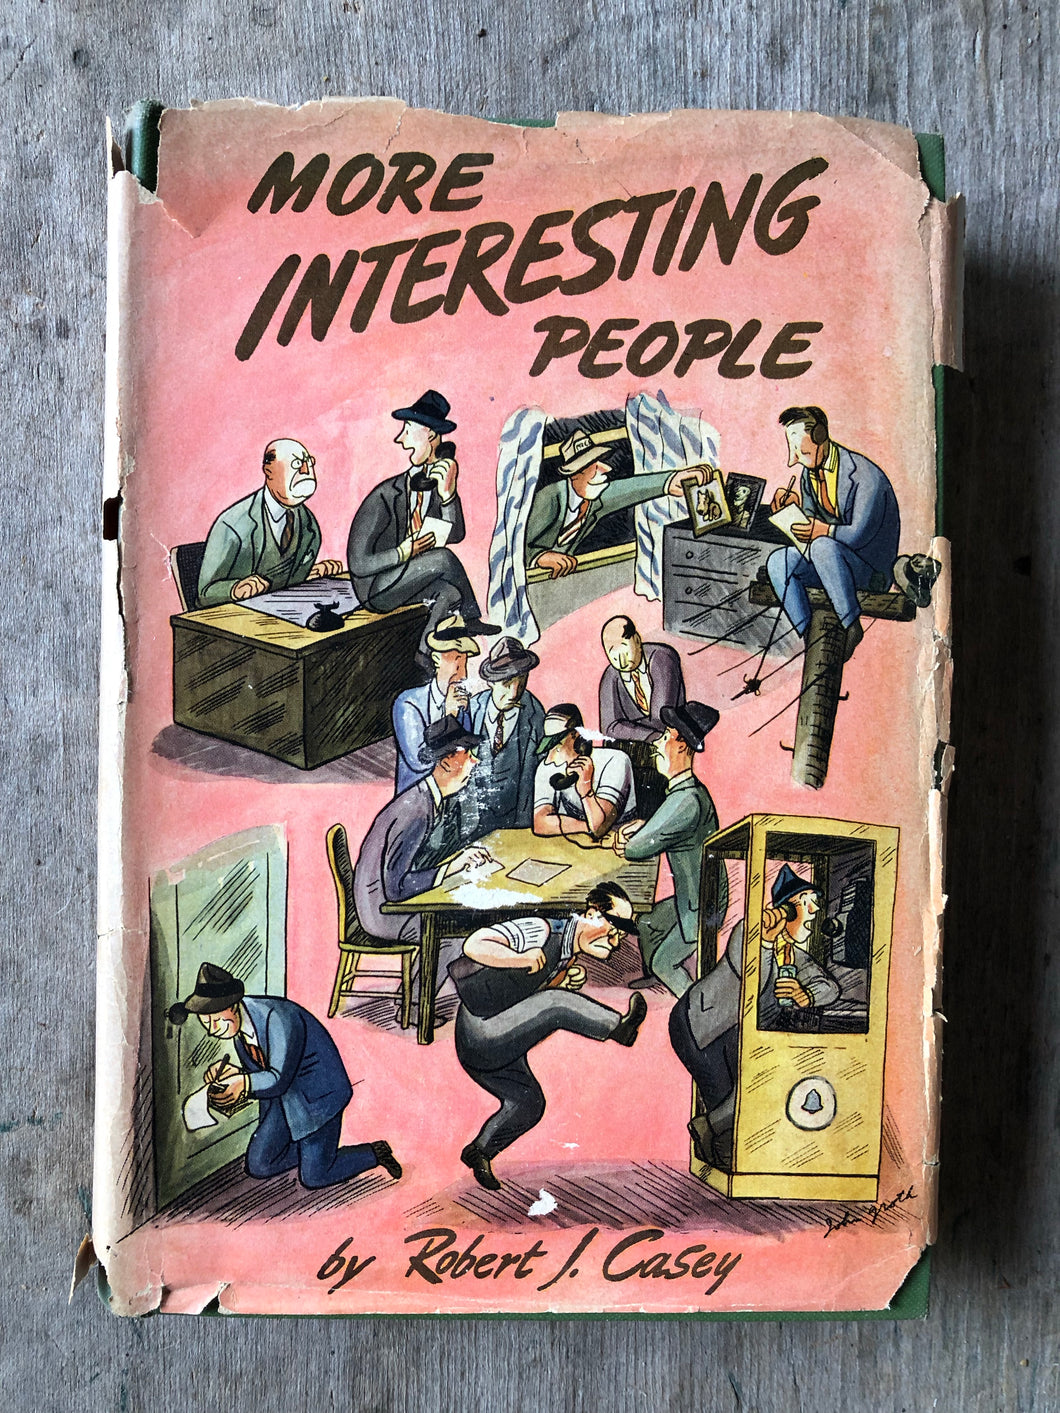 More Interesting People by Robert J. Casey